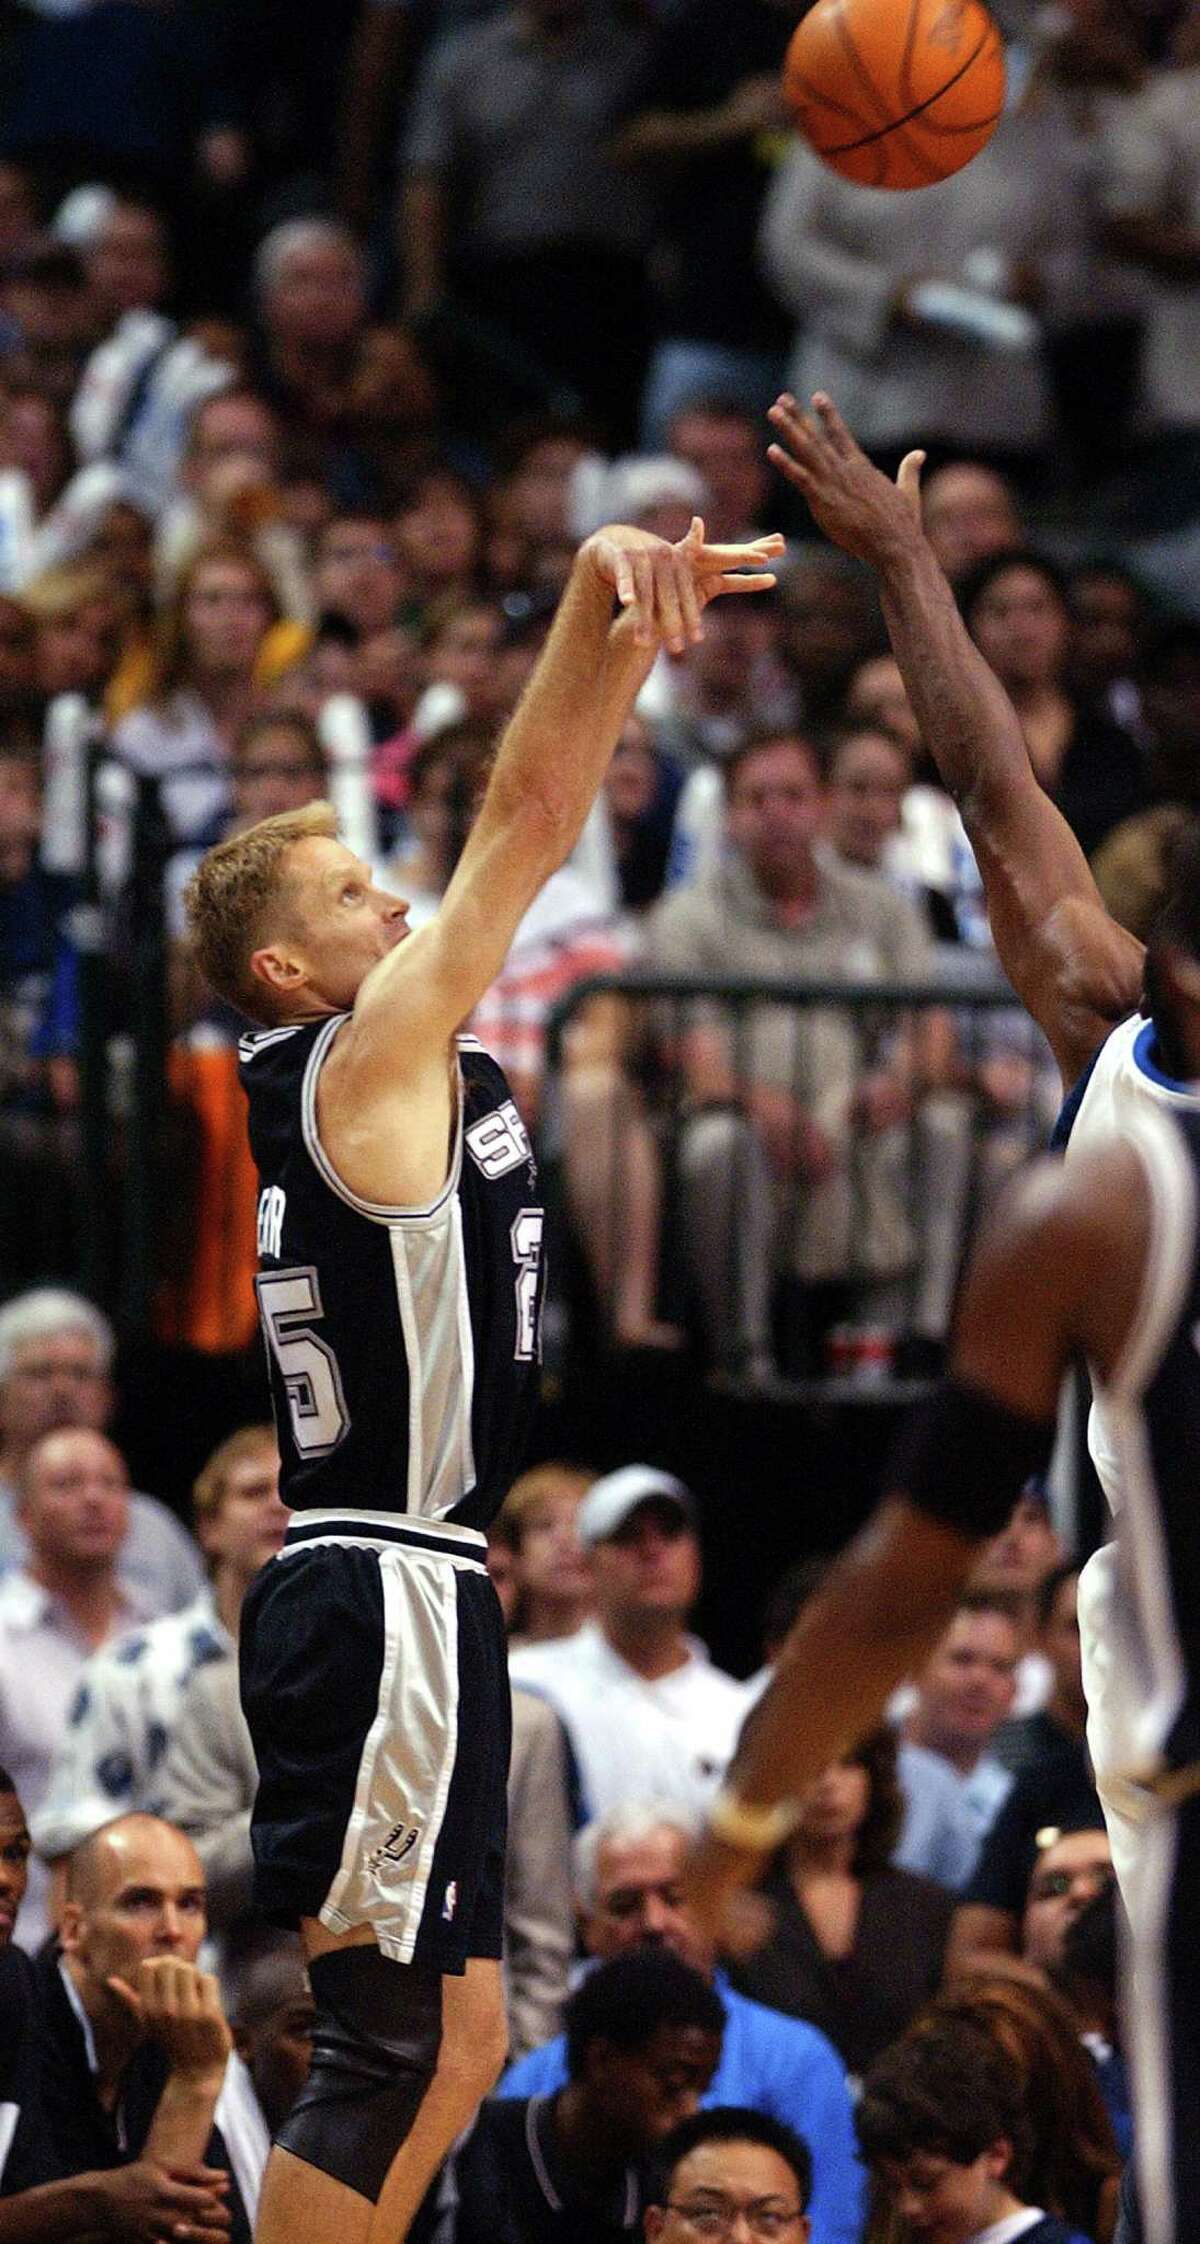 Spurs’ Steve Kerr takes a shot over a Dallas Mavericks defender during second half action of Game 6 of the Western Conference finals at the American Airlines Arena in Dallas on May 29, 2003.